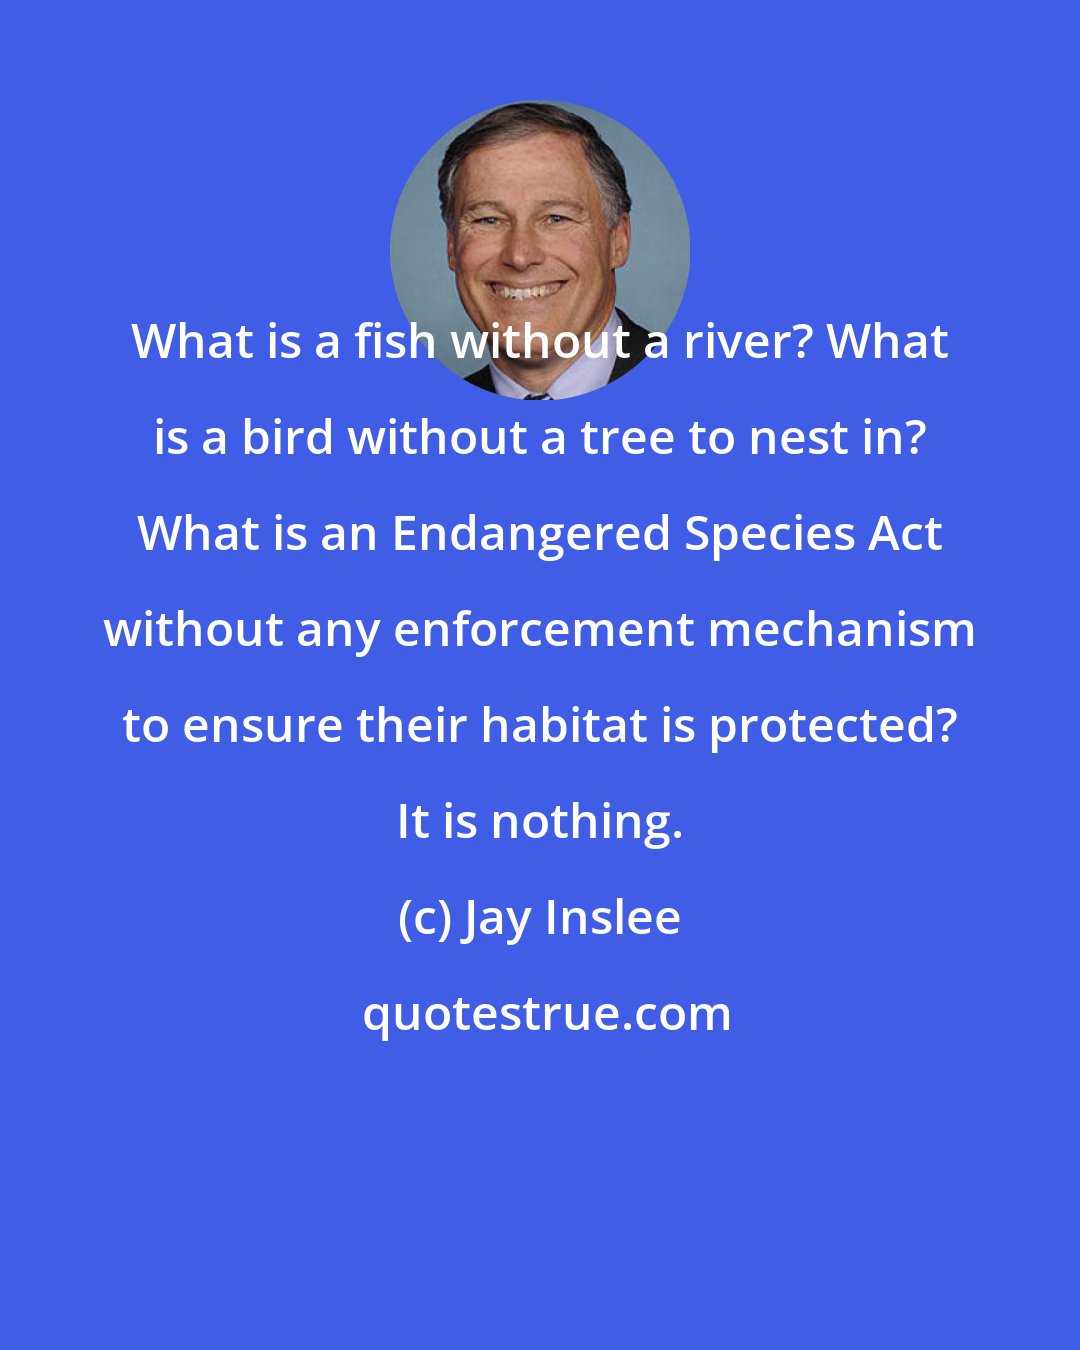 Jay Inslee: What is a fish without a river? What is a bird without a tree to nest in? What is an Endangered Species Act without any enforcement mechanism to ensure their habitat is protected? It is nothing.